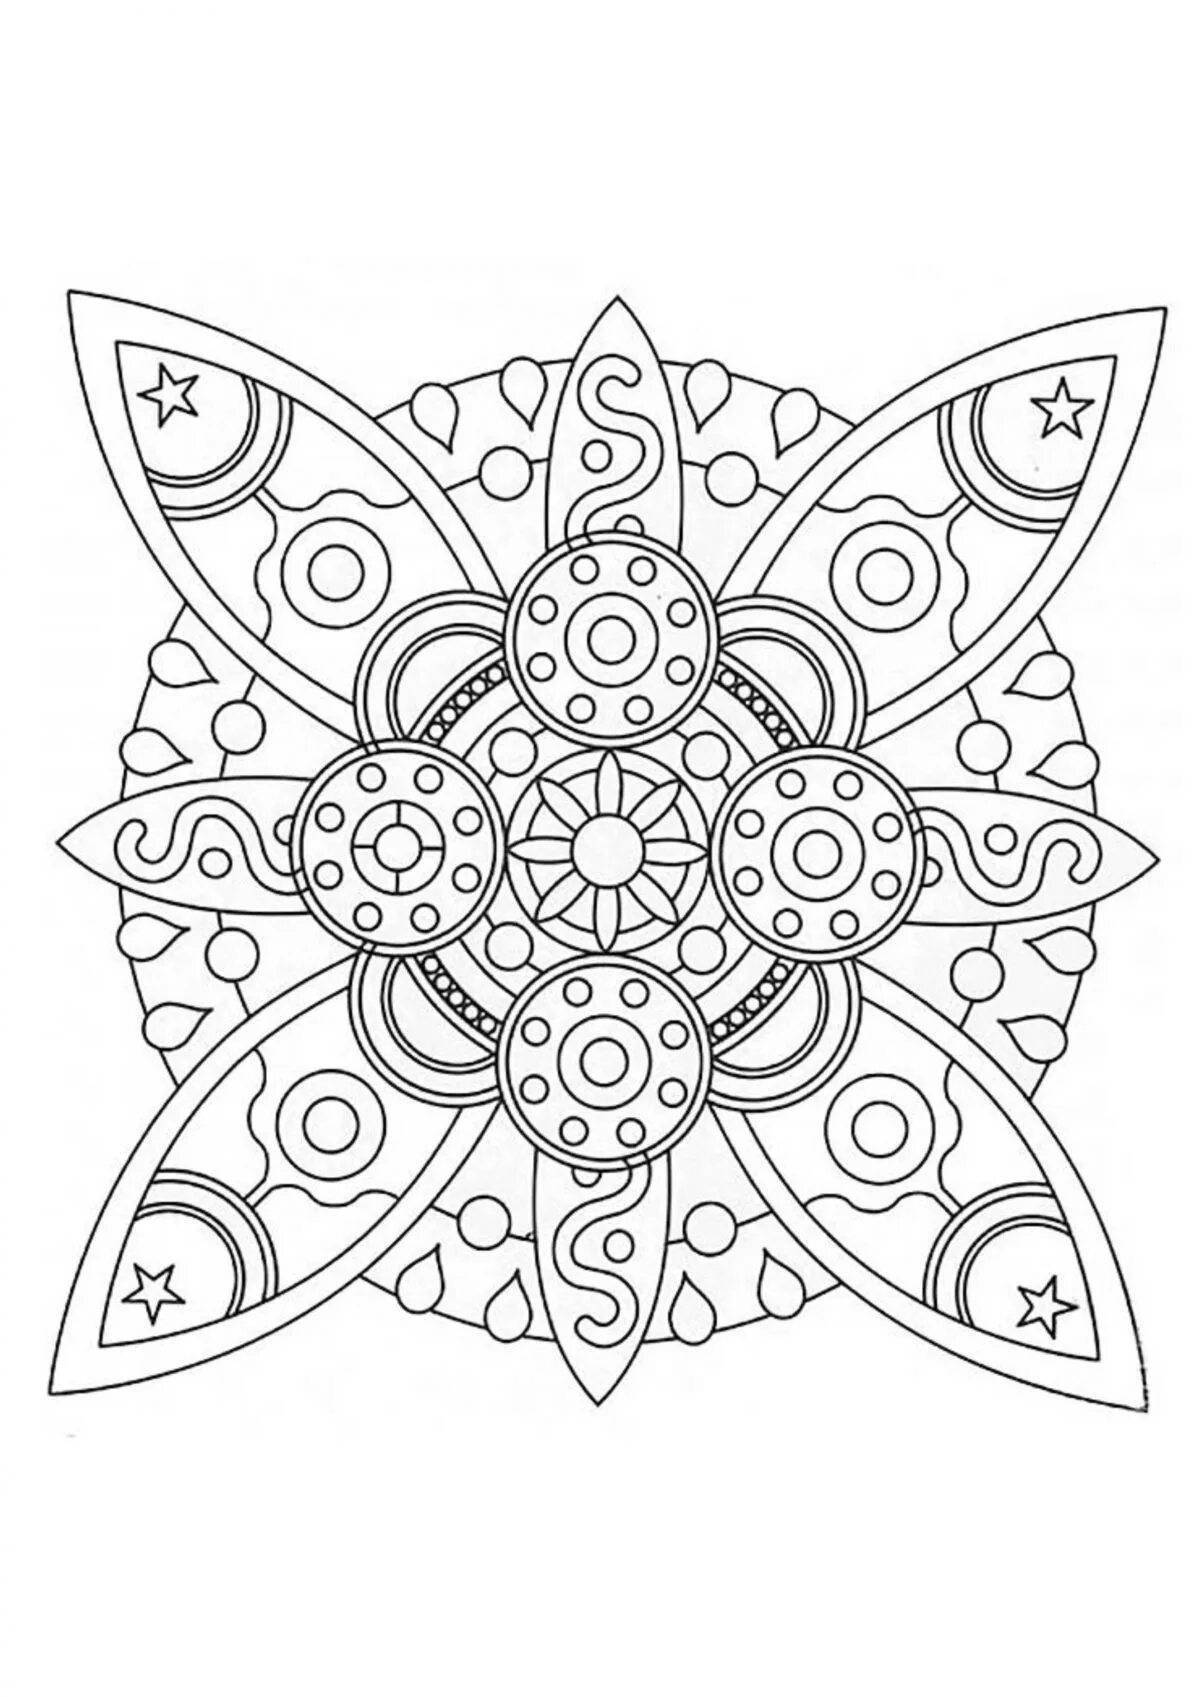 Smooth templates for coloring pages